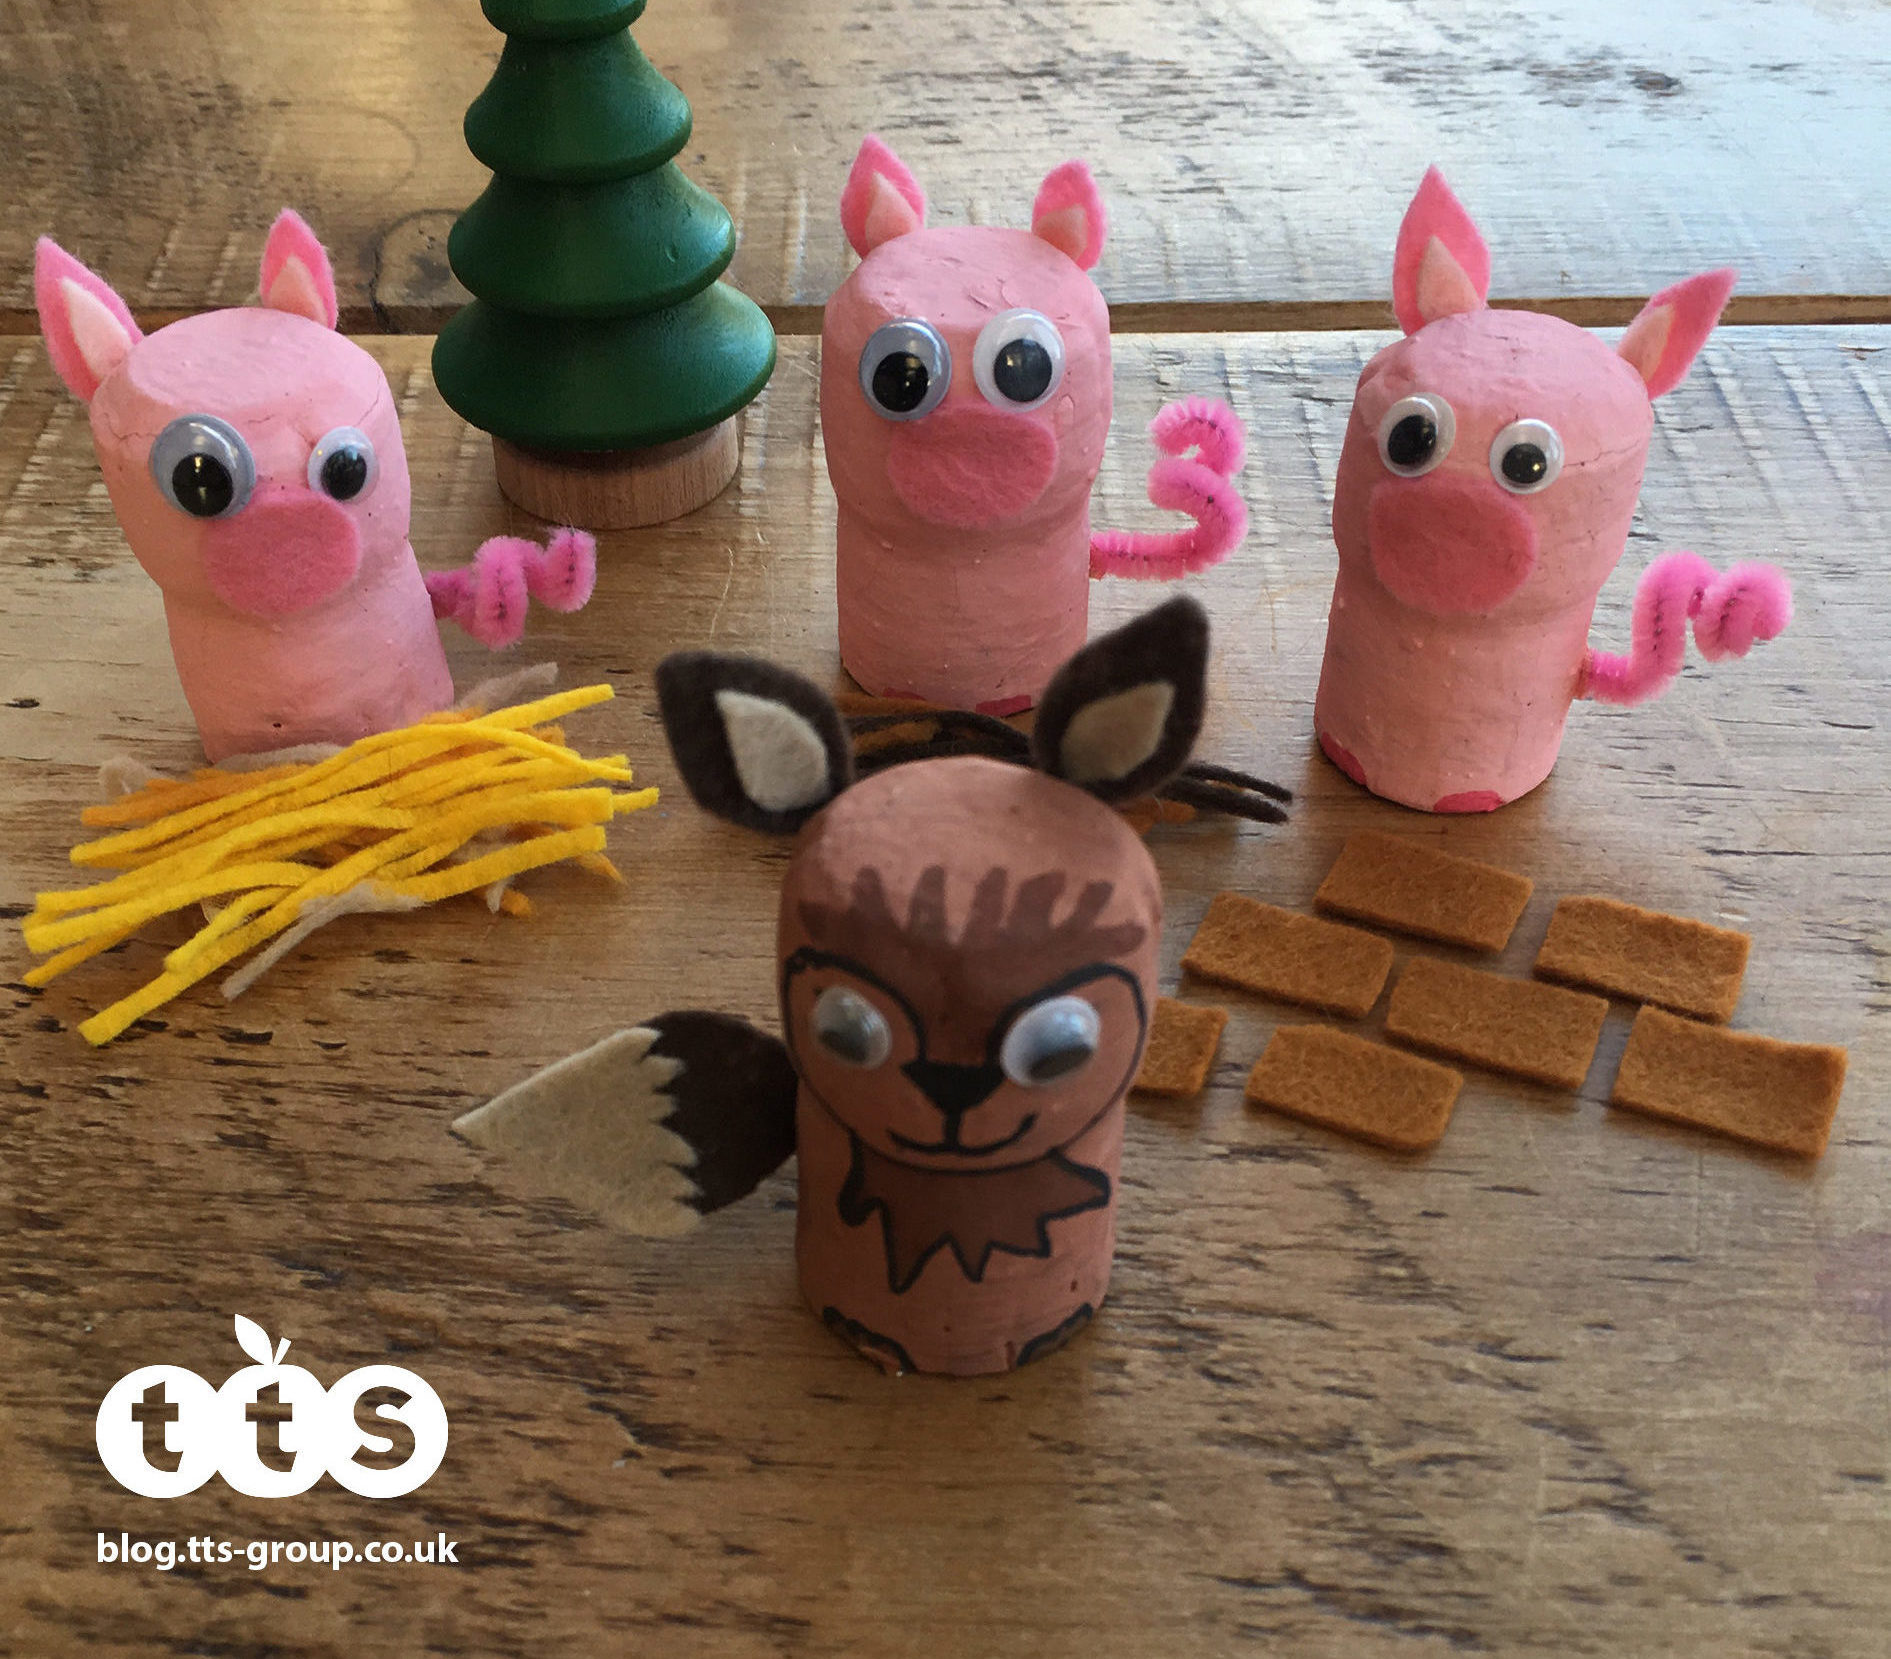 3 little pigs cork characters by Lottie Makes